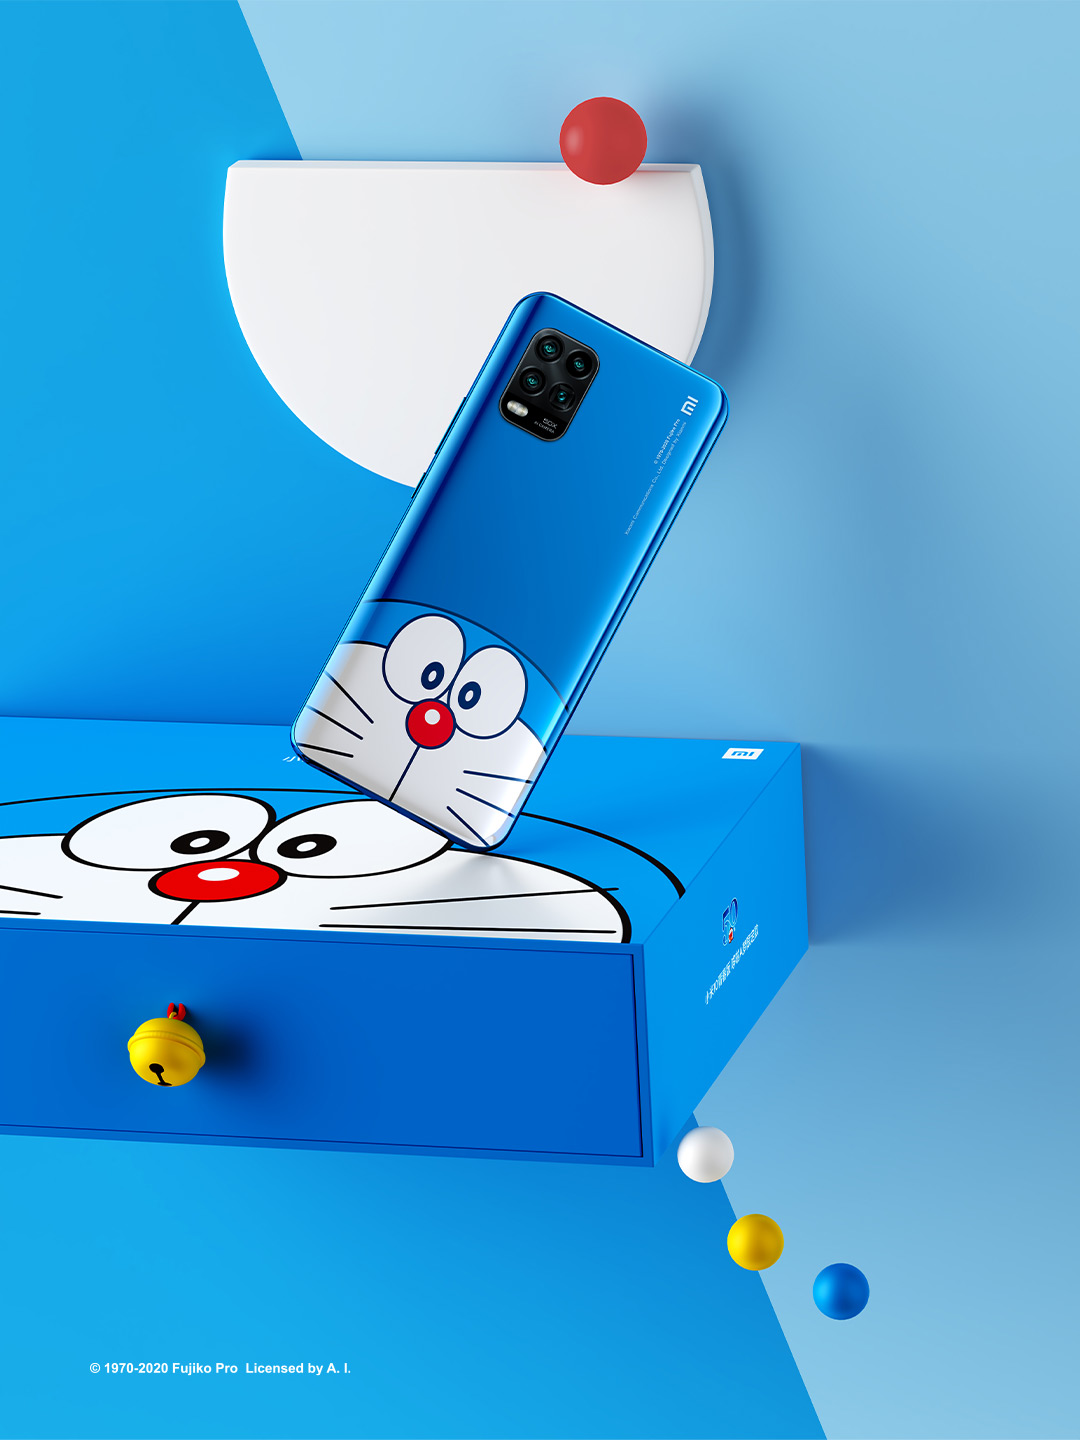 Xiaomi launches new Doraemon-themed Mi 10 Youth 5G smartphone for Â¥2799